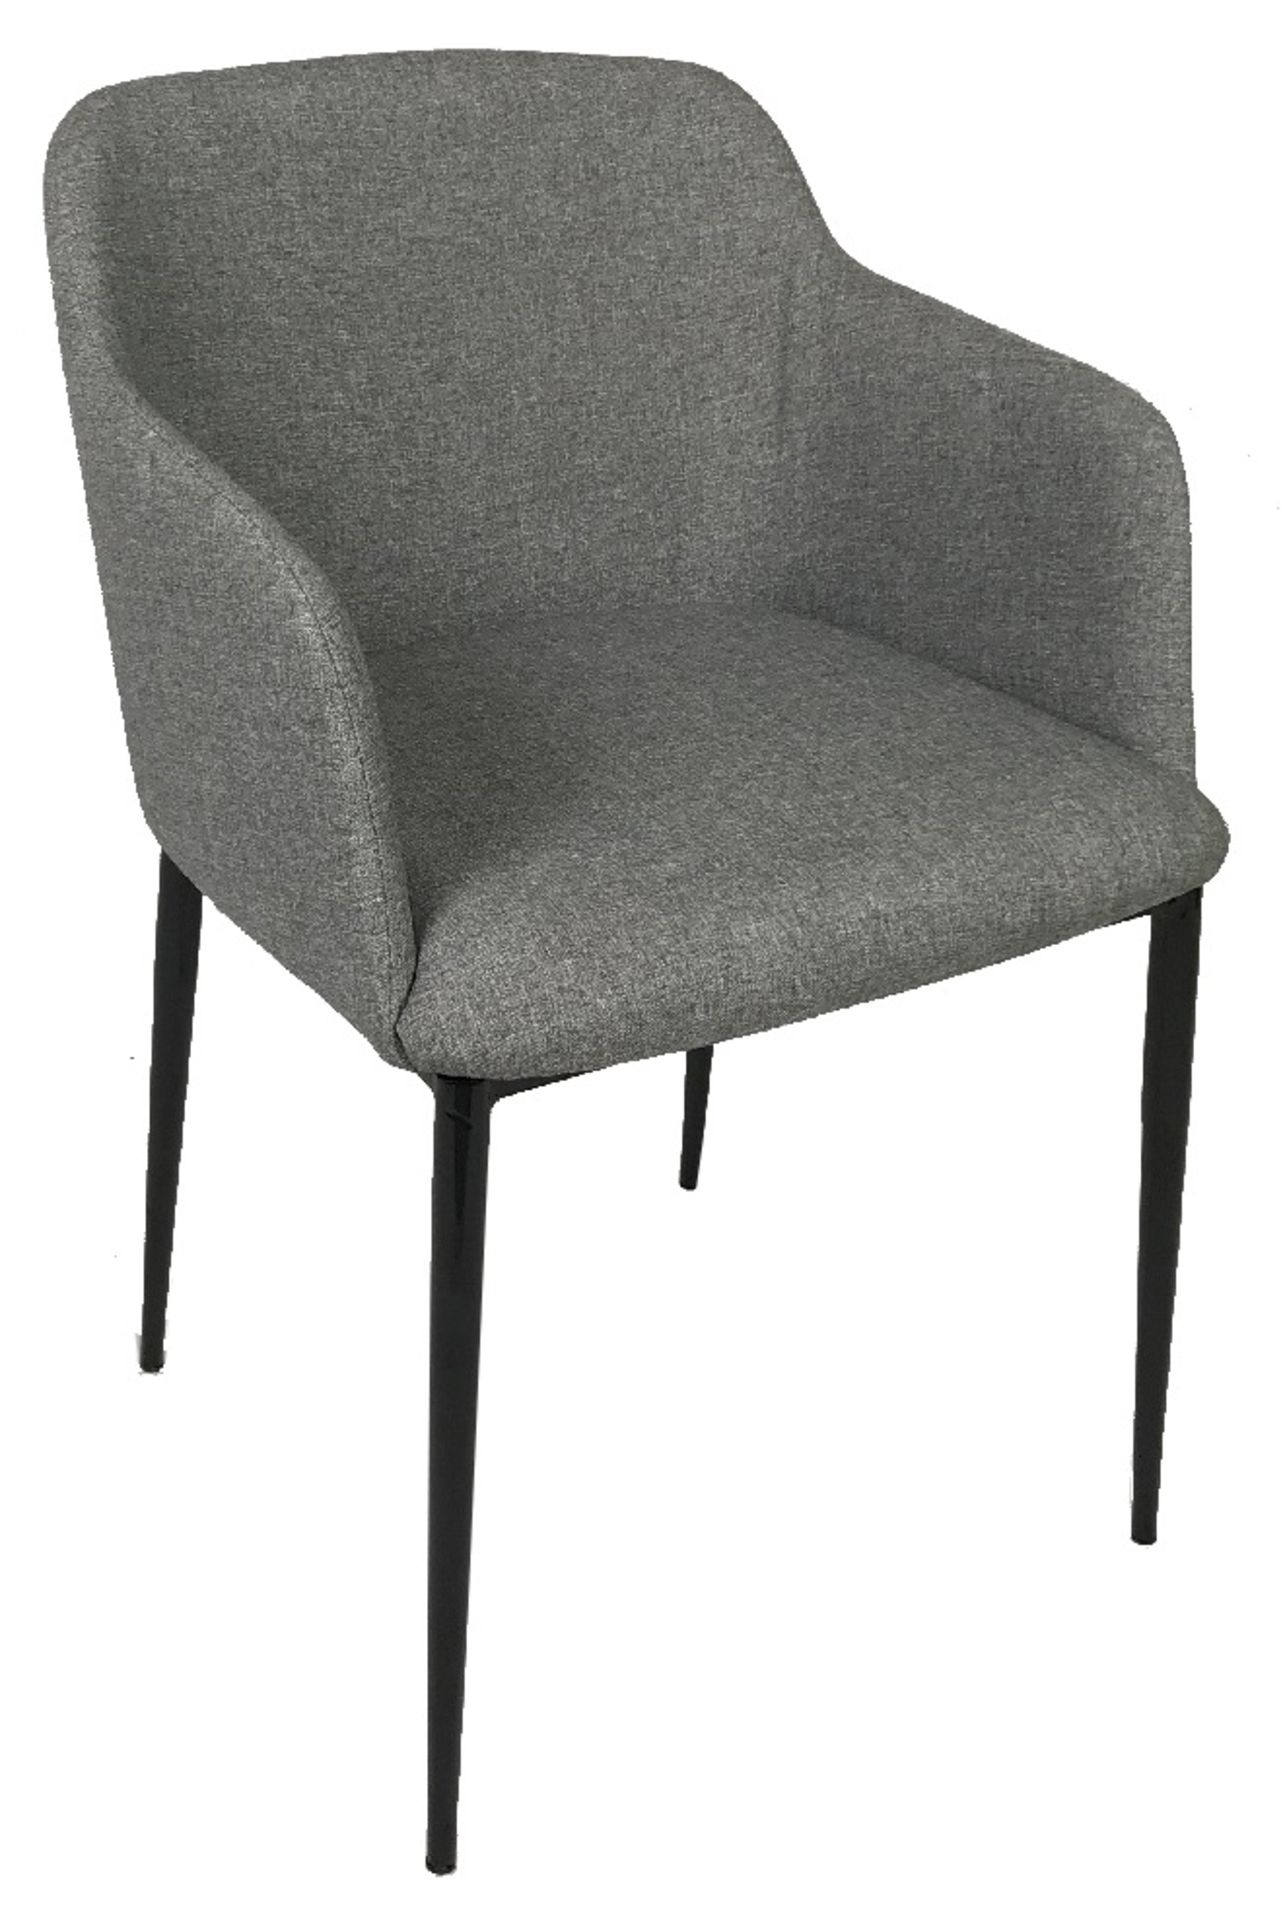 6 x FLANDERS Upholstered Contemporary Dining Chairs In Grey Fabric, With Slender Black Metal